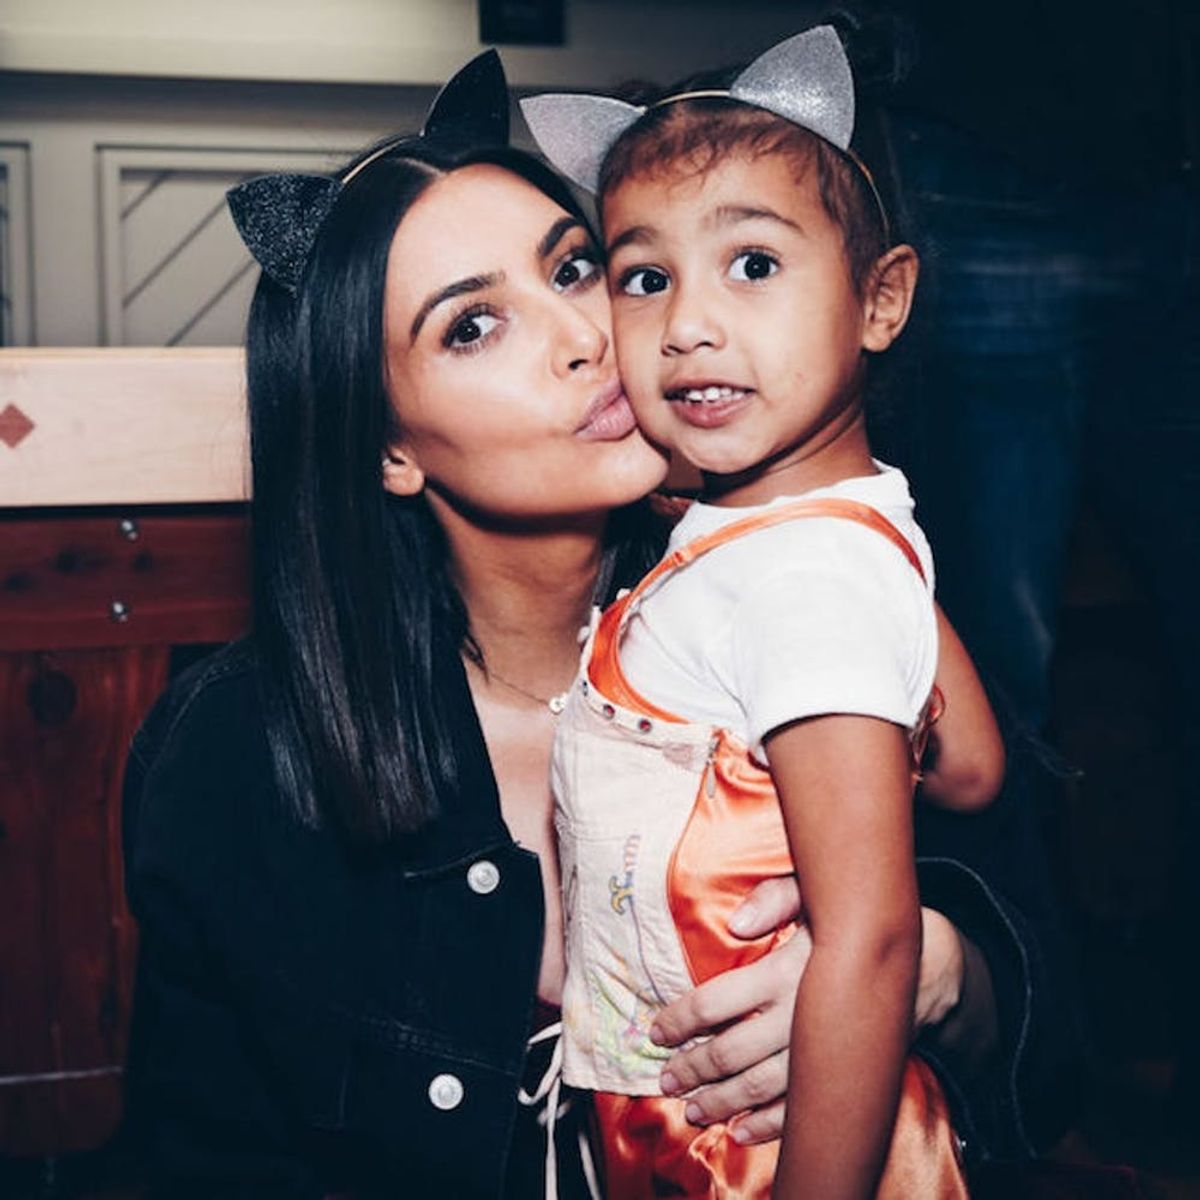 North West Telling the Paparazzi Not to Take Pics Isn’t Cute — It’s Sad